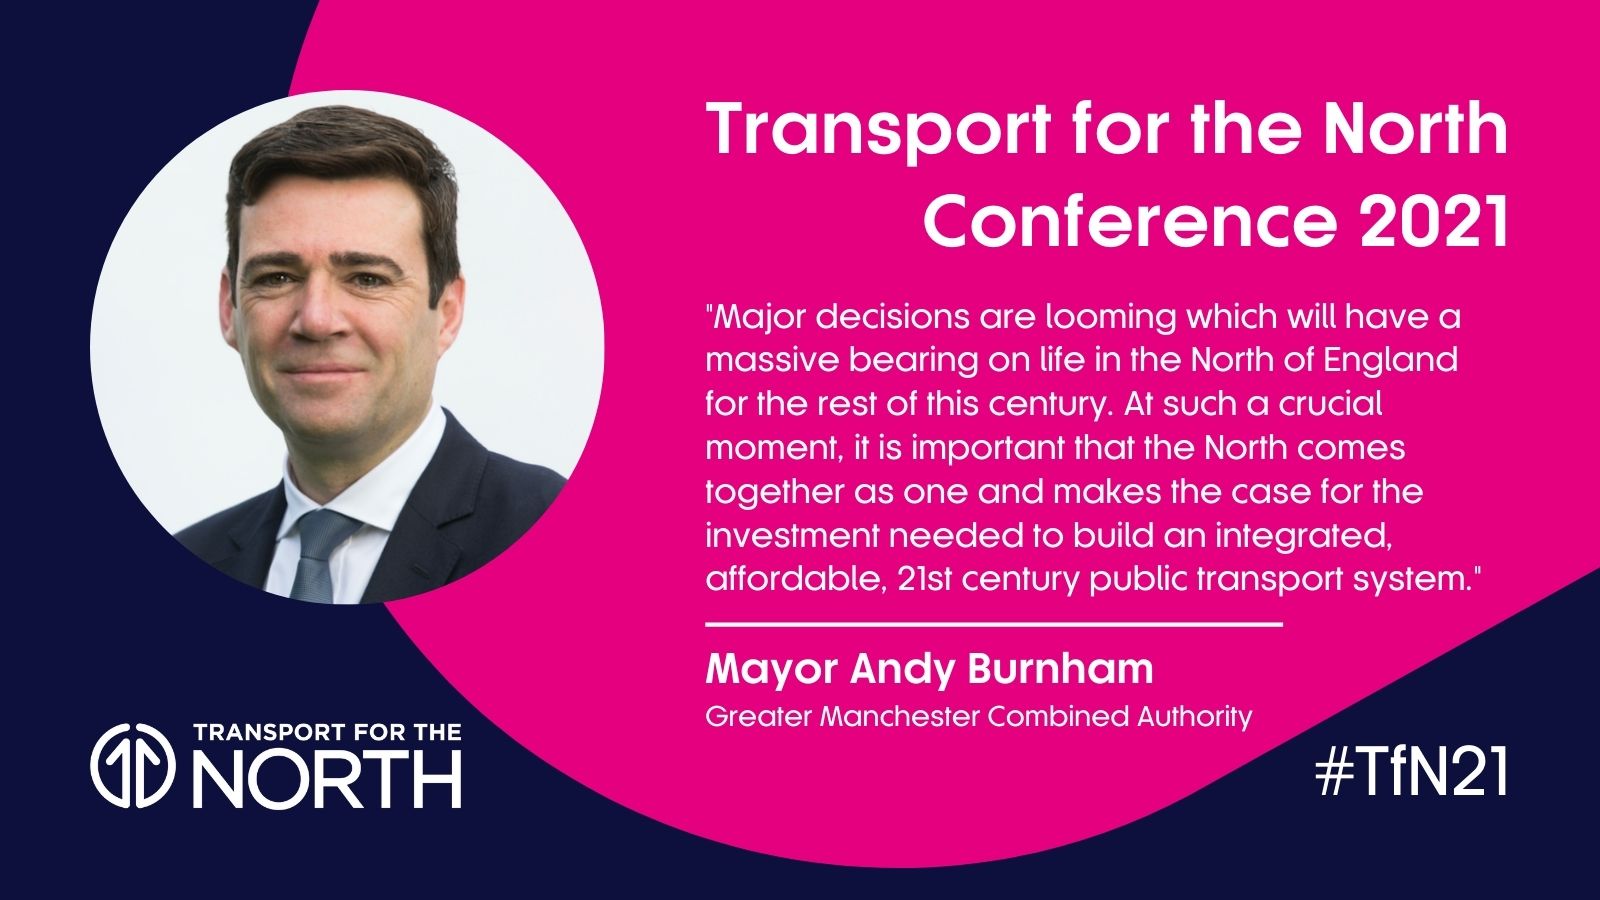 Andy Burnham speaker quote ahead of Transport for the North annual conference 2021